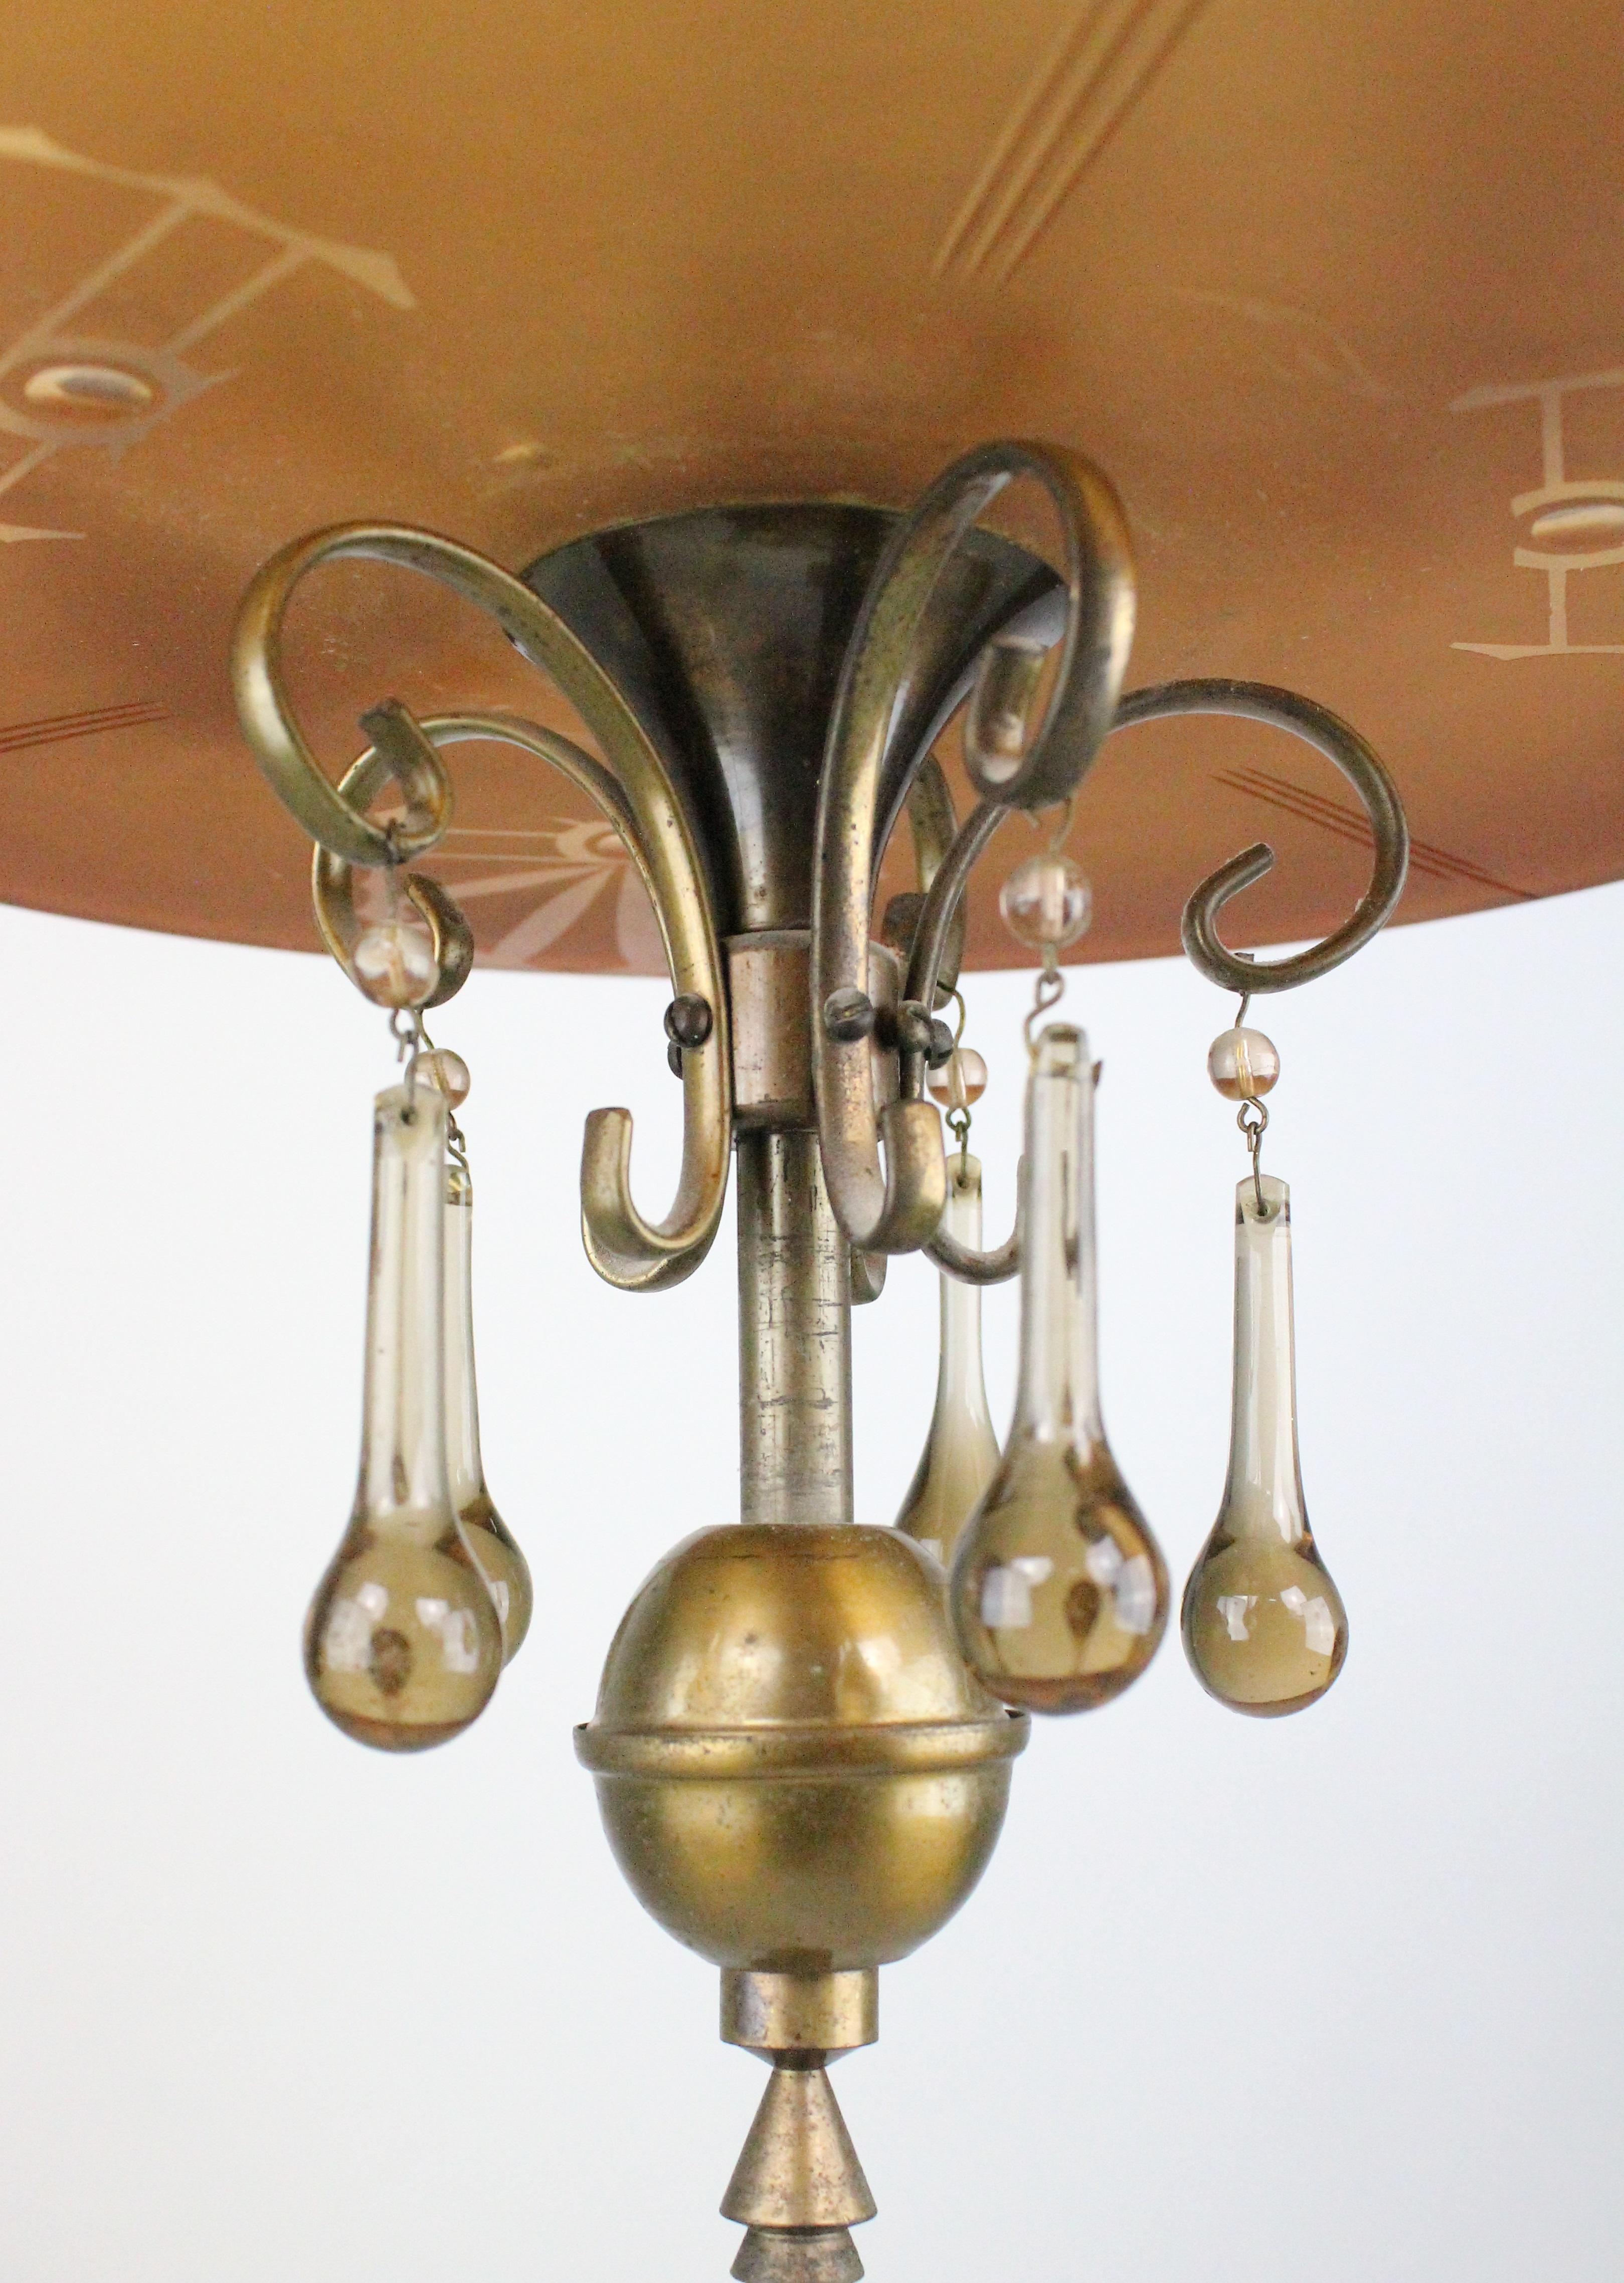 Wonderful and unusual Swedish 1920s chandelier in amber colored glass and bronze.
In full working order. Great original condition. No damages. Most likely made by Orrefors.
Holders for four light bulbs. Very stylish, makes a great statement. Great